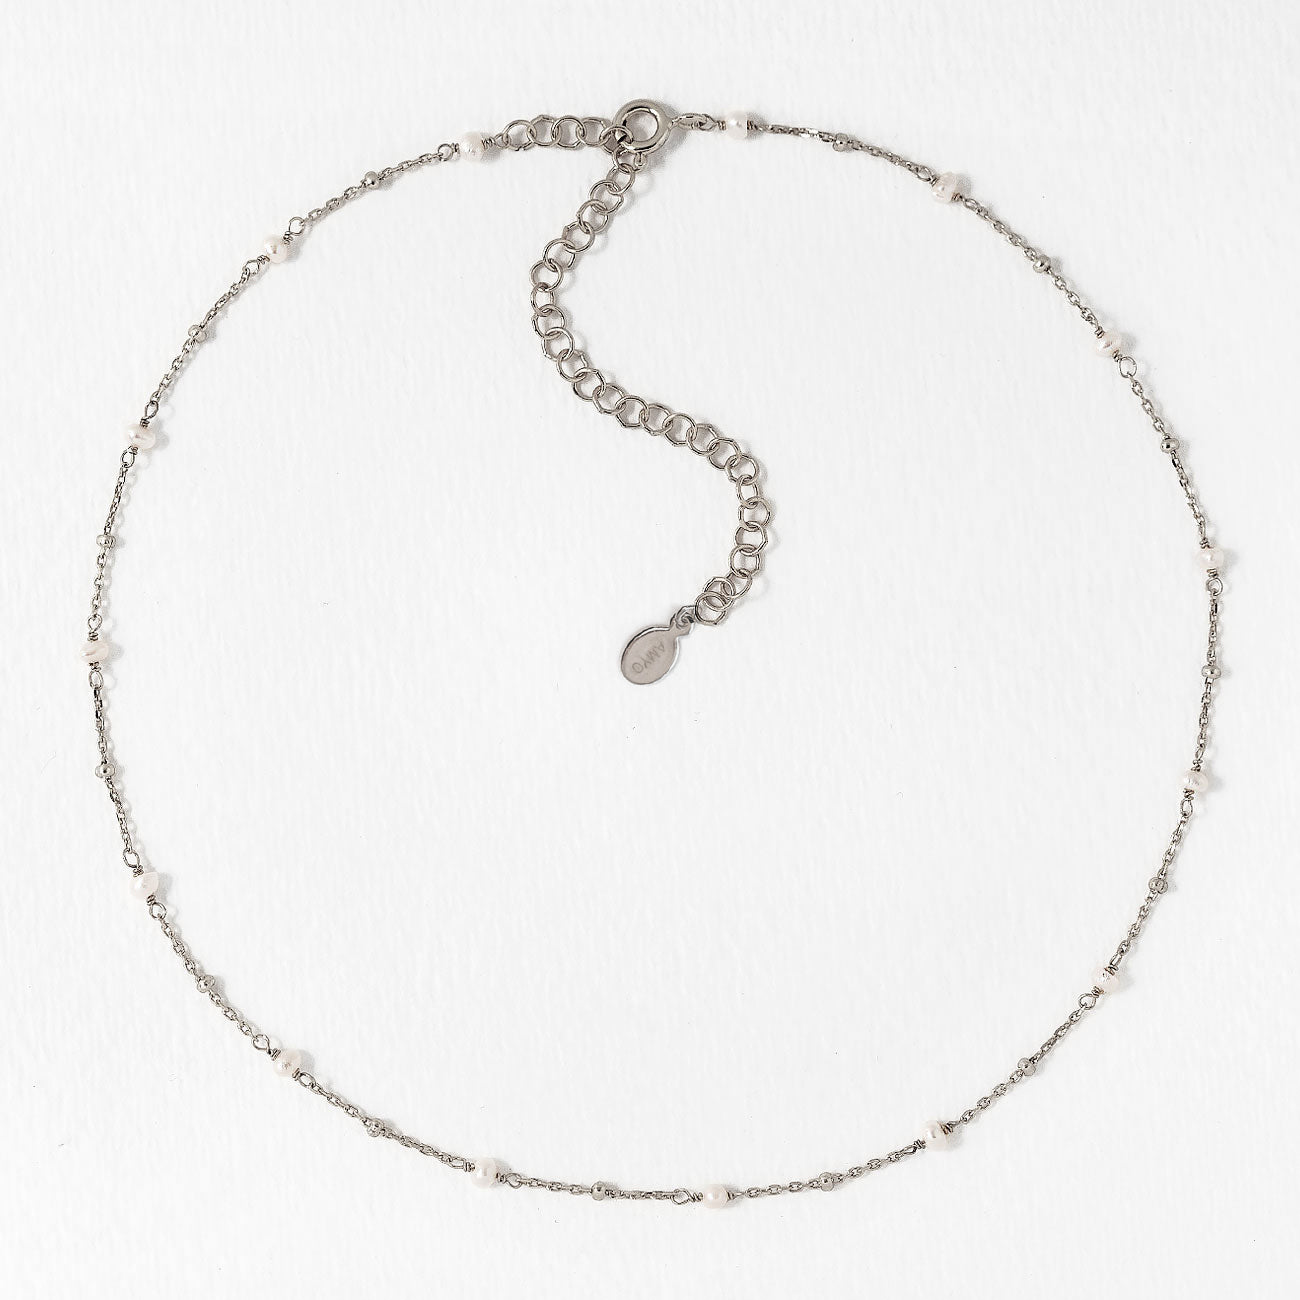 Dainty Silver Beaded Chain Necklace